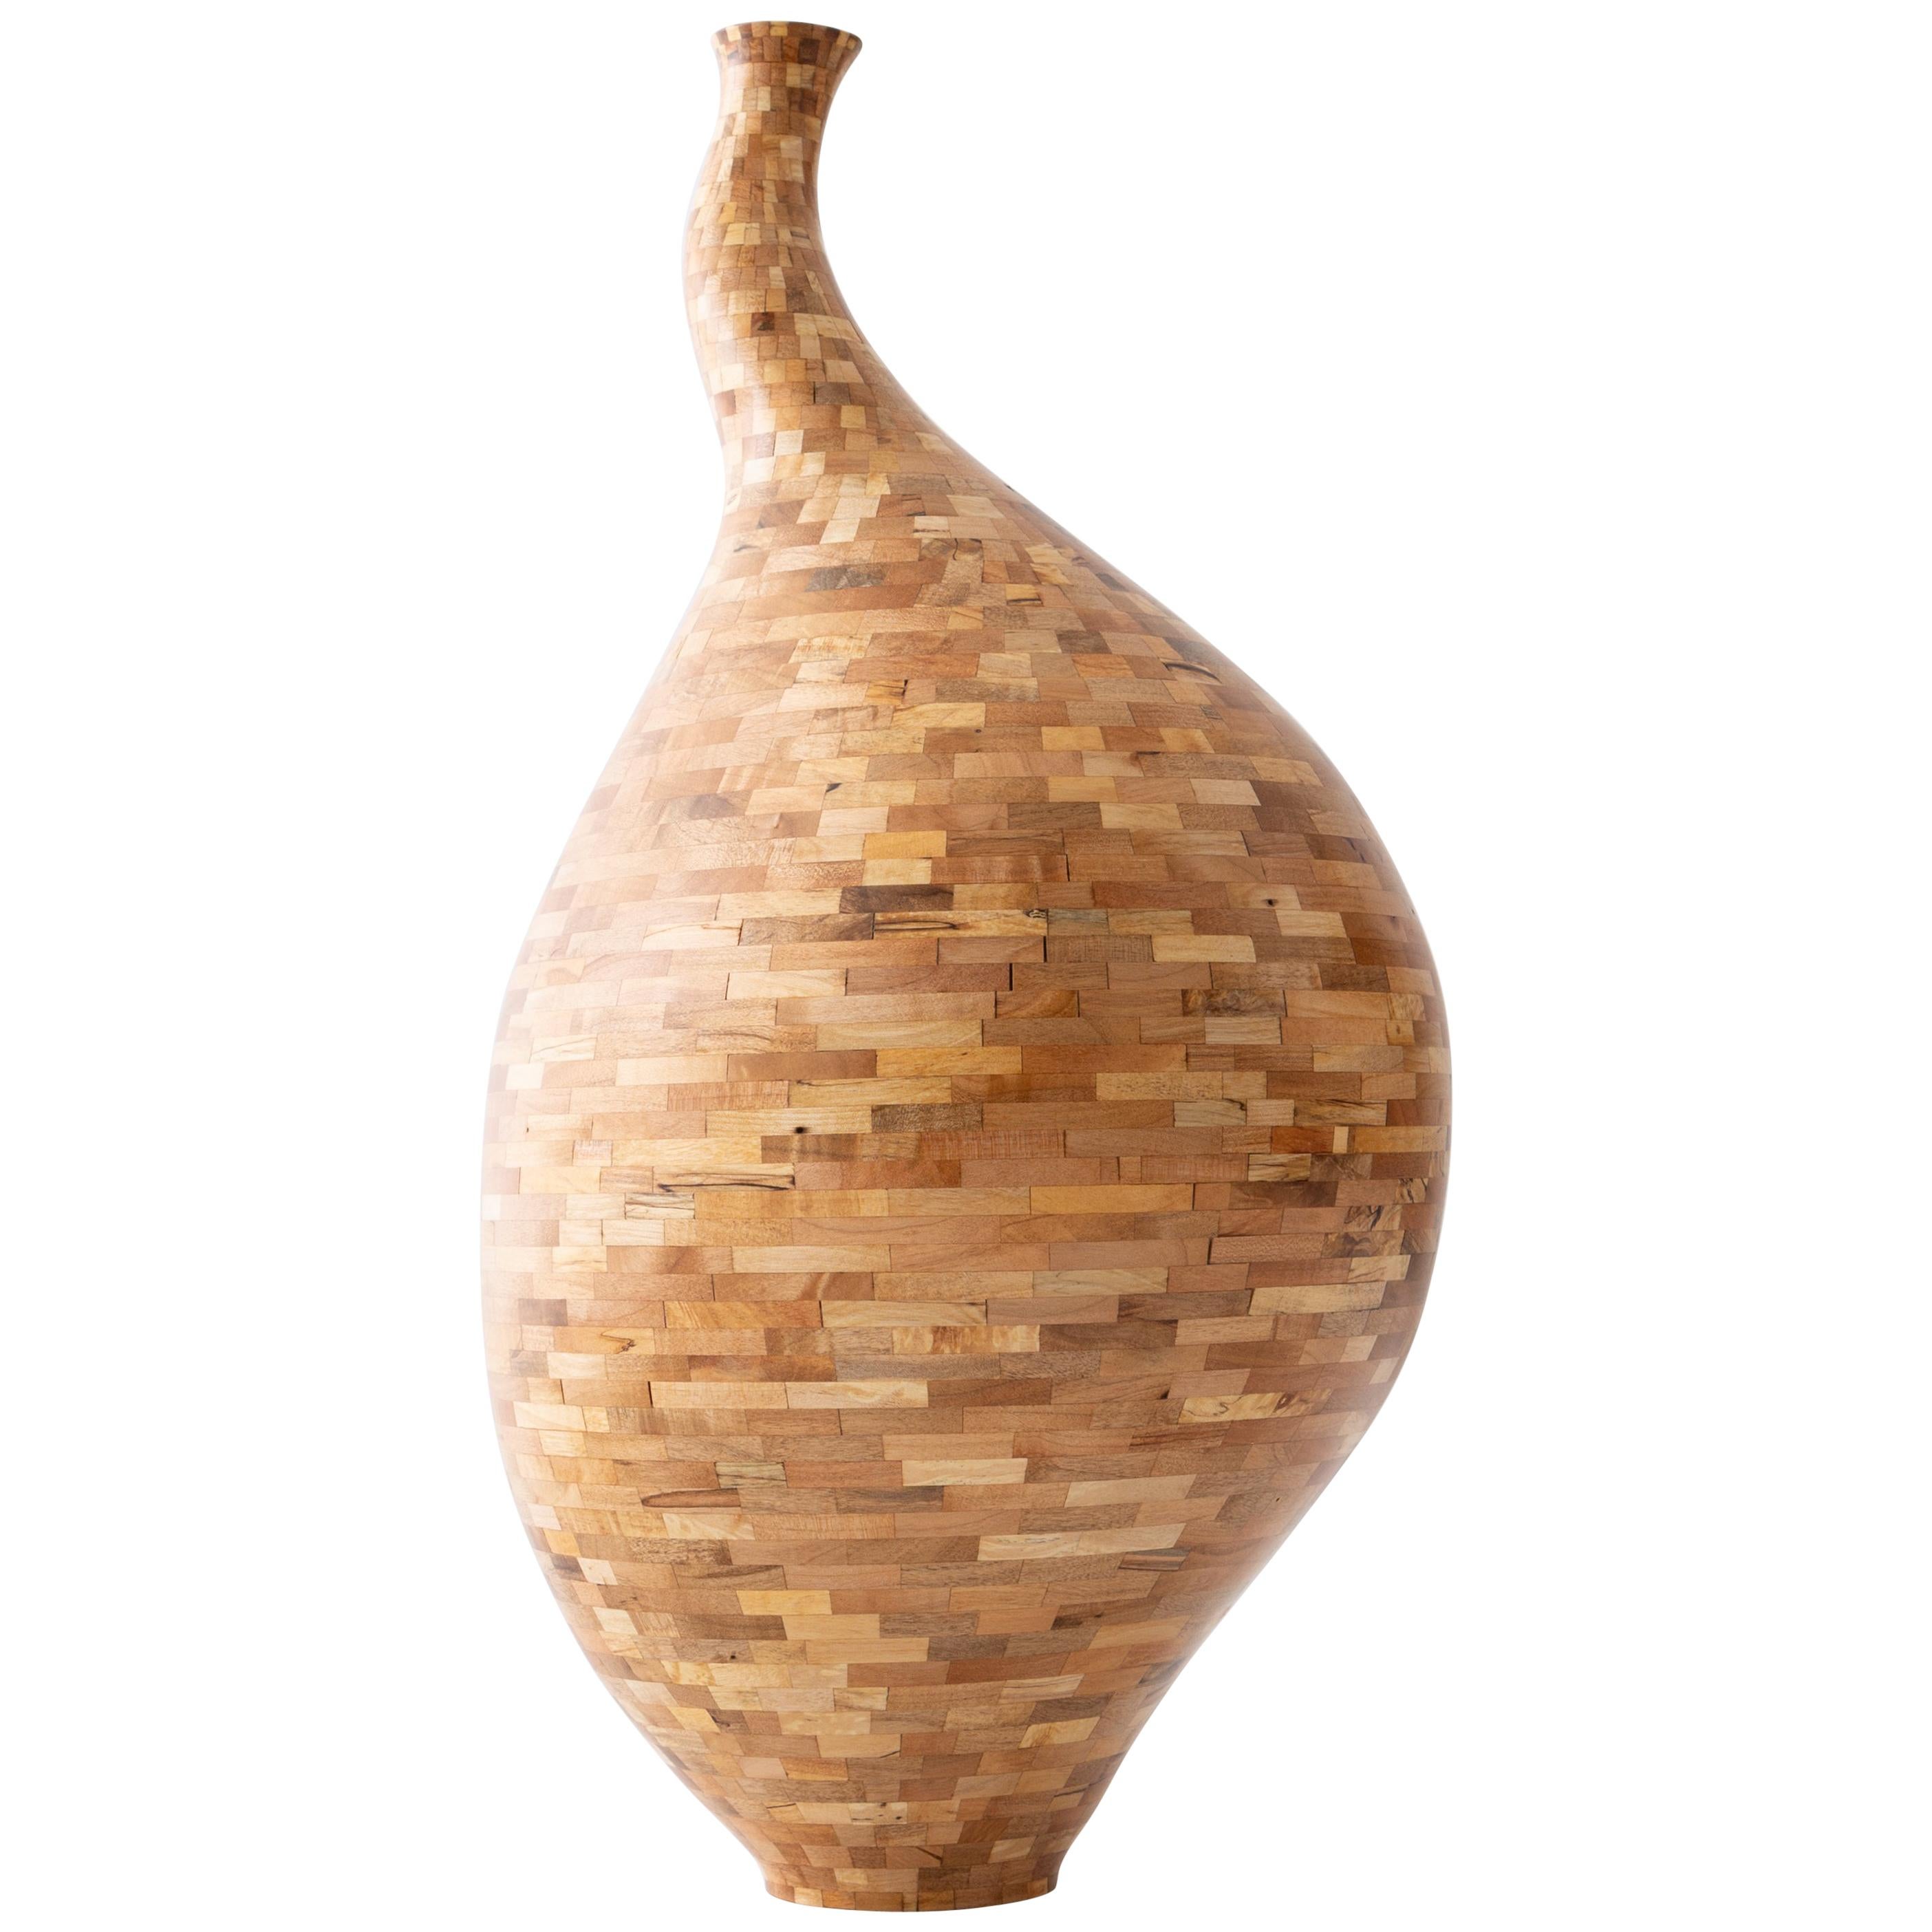 Contemporary Spalted Maple Goose Neck Vase #1 by Richard Haining, Available Now